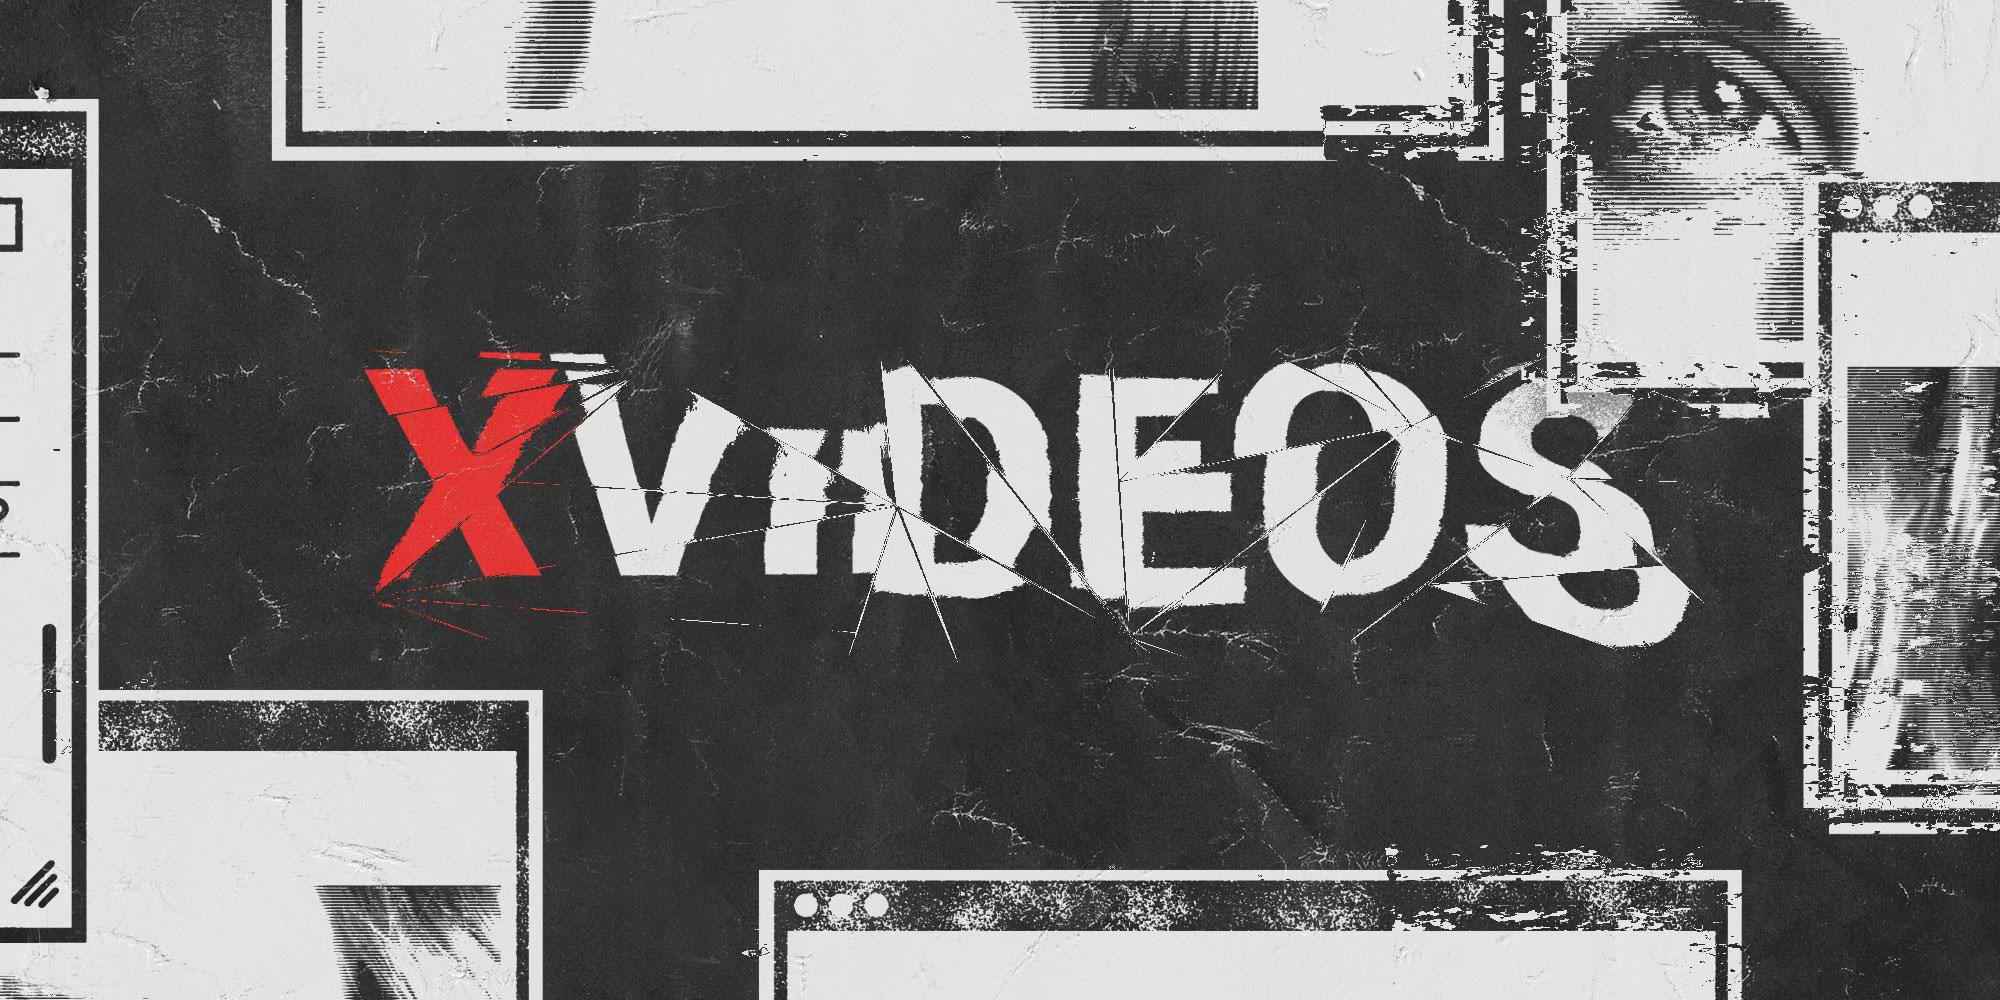 Xvdo Download - XVideos, World's Most Popular Porn Site, Reportedly Hosts Nonconsensual  Content & Child Exploitation